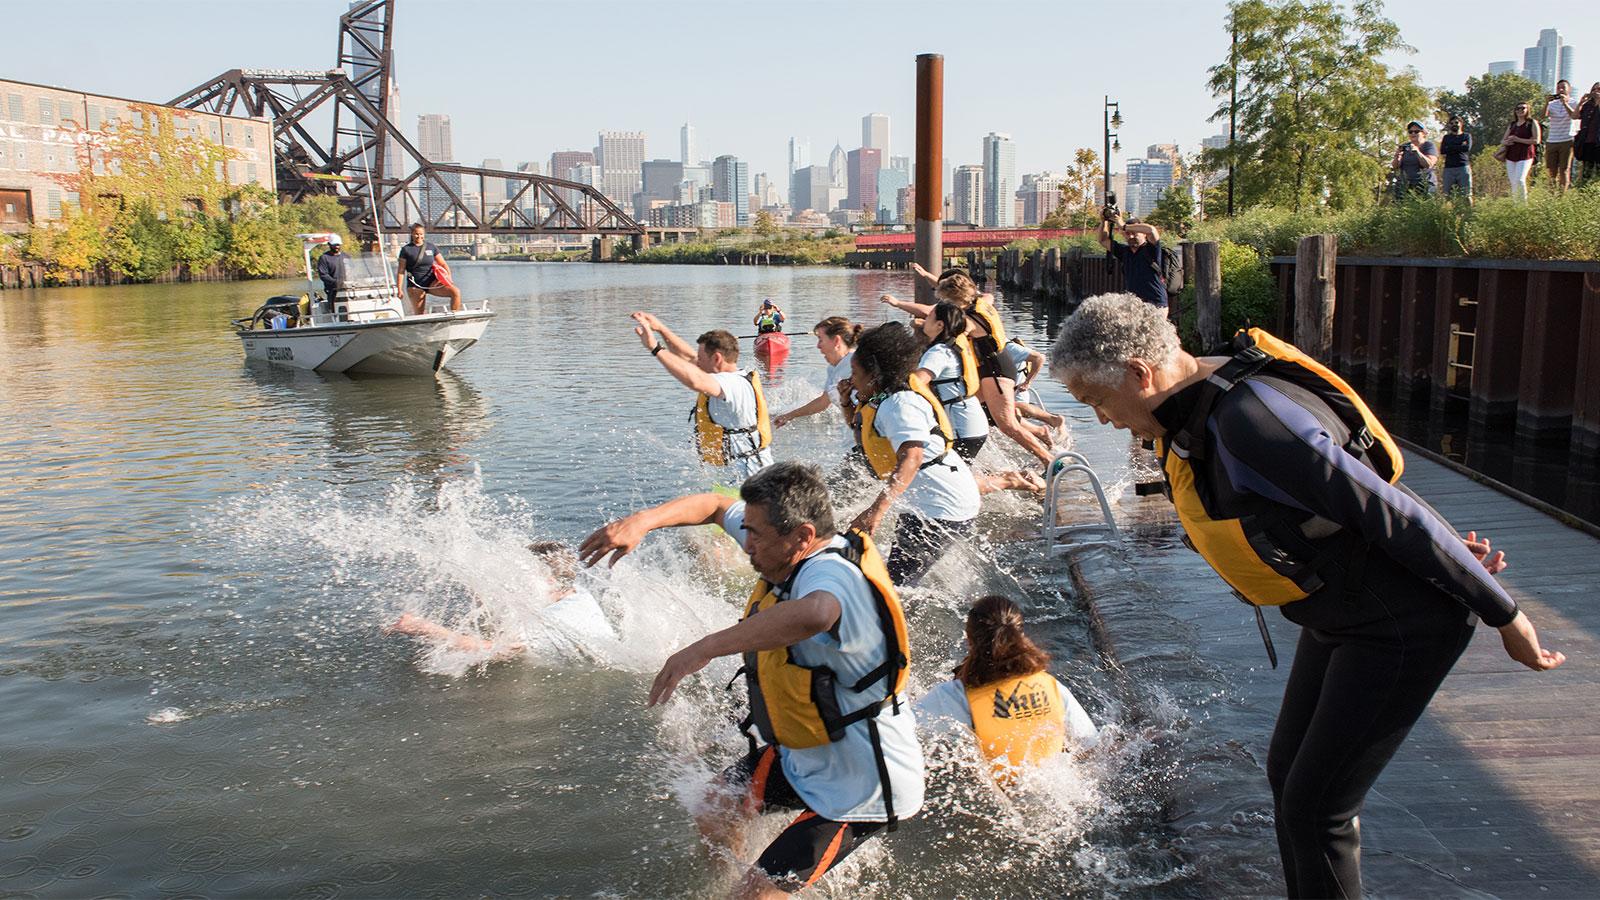 Cook County Board President Toni Preckwinkle and other elected officials jump into the Chicago River during the “Big Jump” event in September 2017. (Courtesy Metropolitan Water Reclamation District)